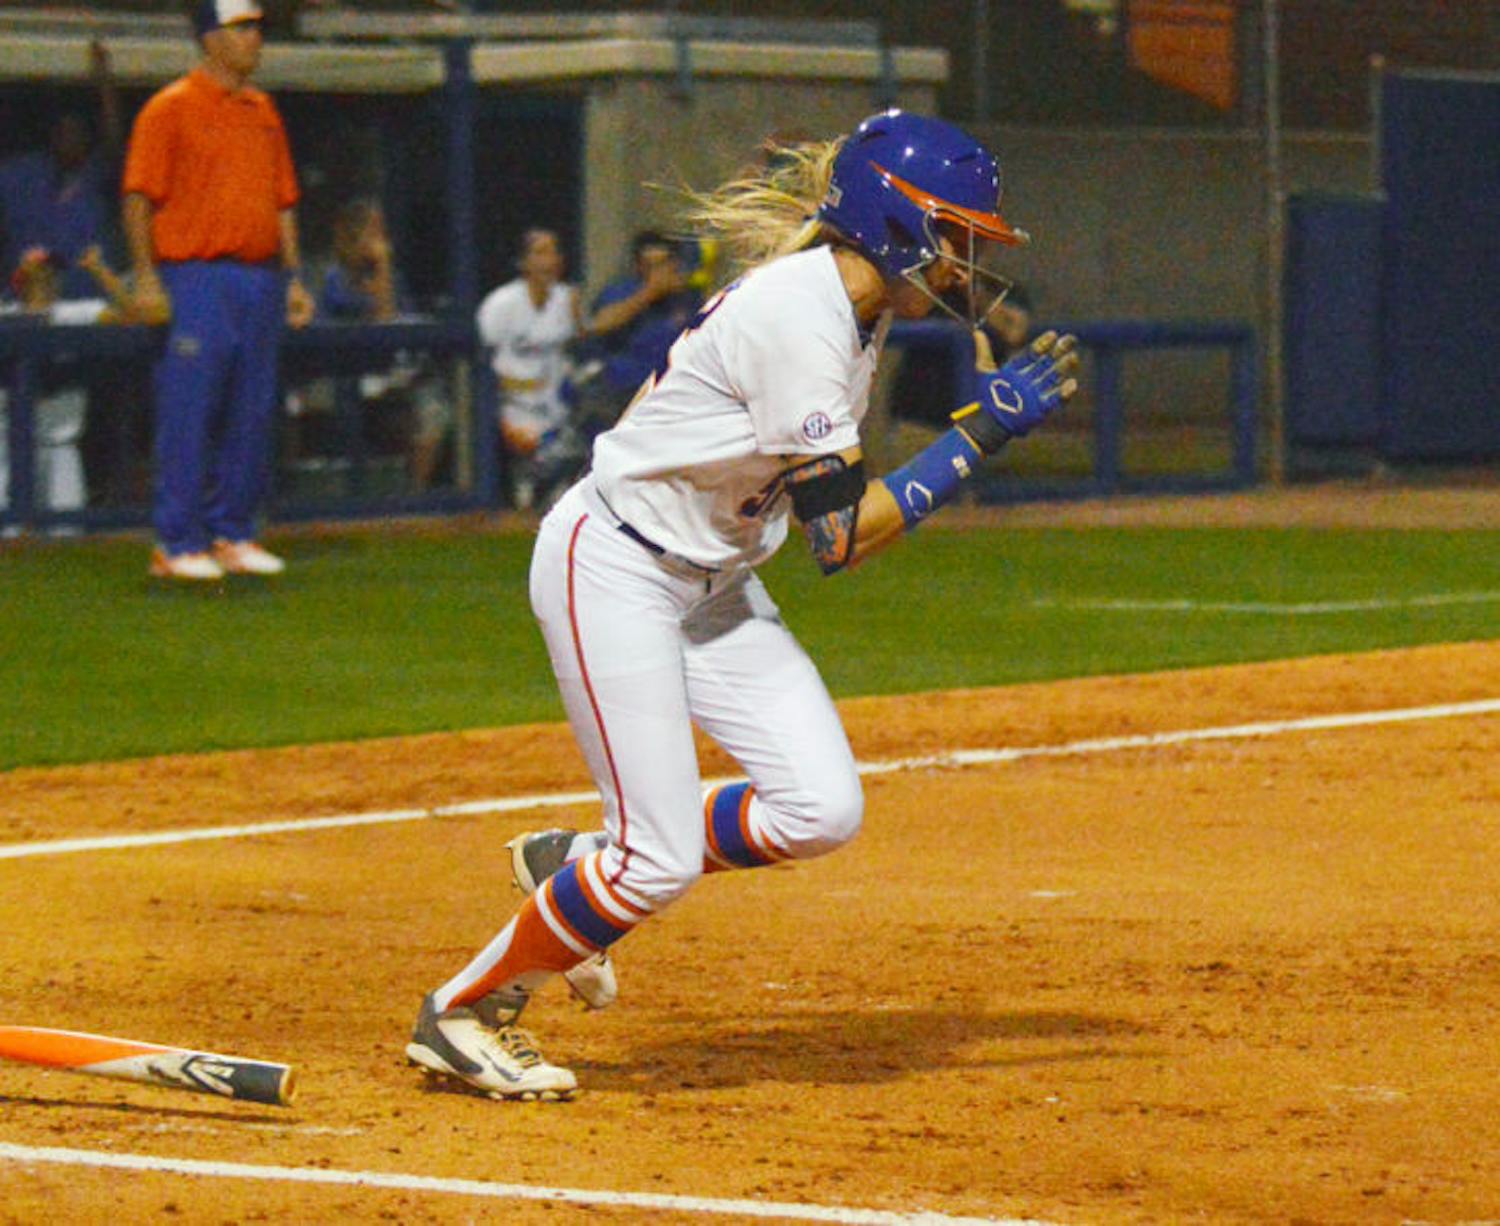 Justine McLean runs toward first base during Florida’s 6-0 win against Jacksonville on Feb. 19 at Katie Seashole Pressly Stadium. McLean leads the Gators with a .412 batting average.